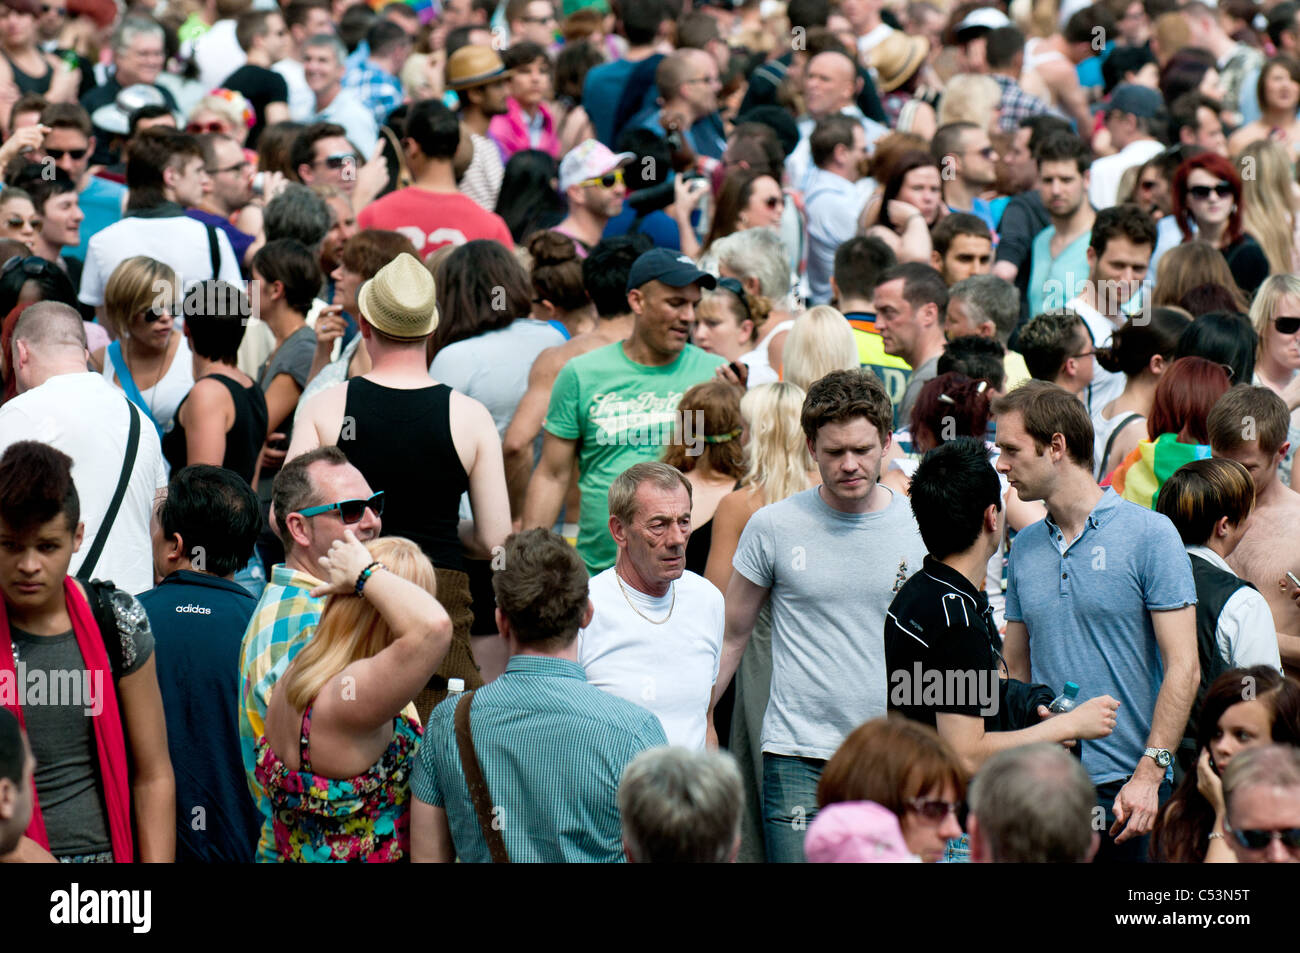 A crowd of people. Stock Photo